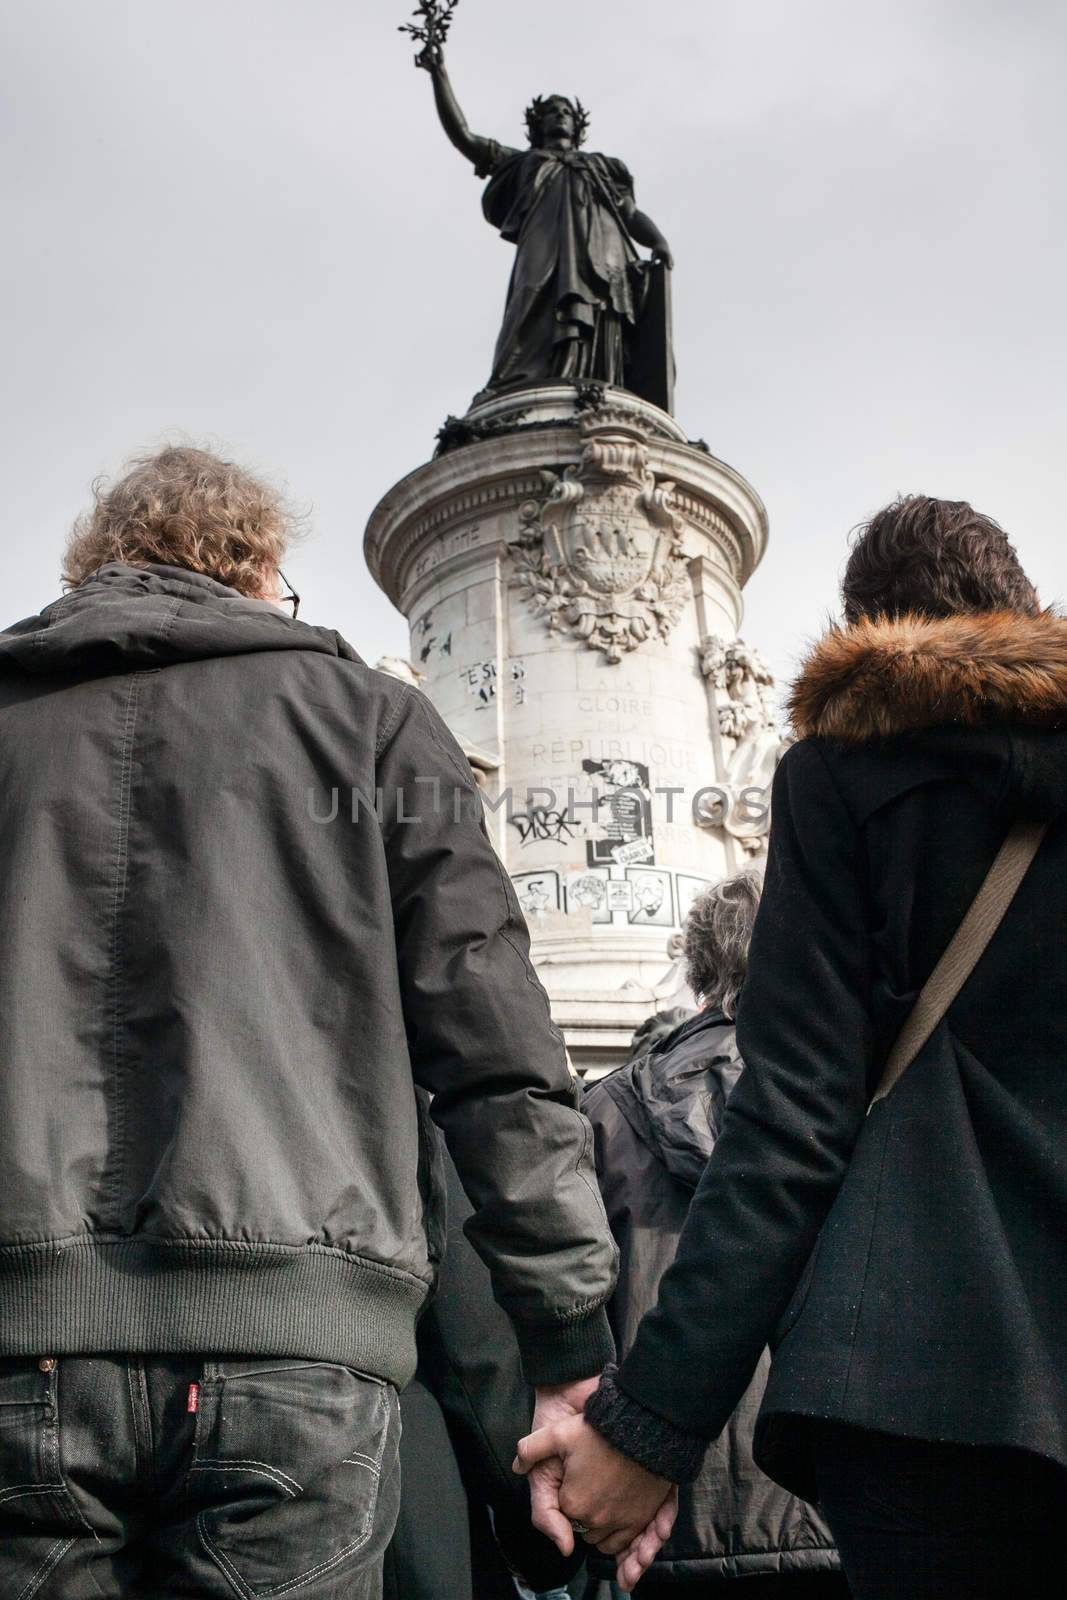 FRANCE, Paris: A man and woman hold hands as a moment of silence is held at Place de la Republique in Paris, France on November 16, 2015. Mourners gathered at Place de la Republique and the Eiffel Tower to pay tribute to the 129 people killed in Friday's terrorist attacks. A moment of silence was held in Paris at noon local time, with many across the world joining in.